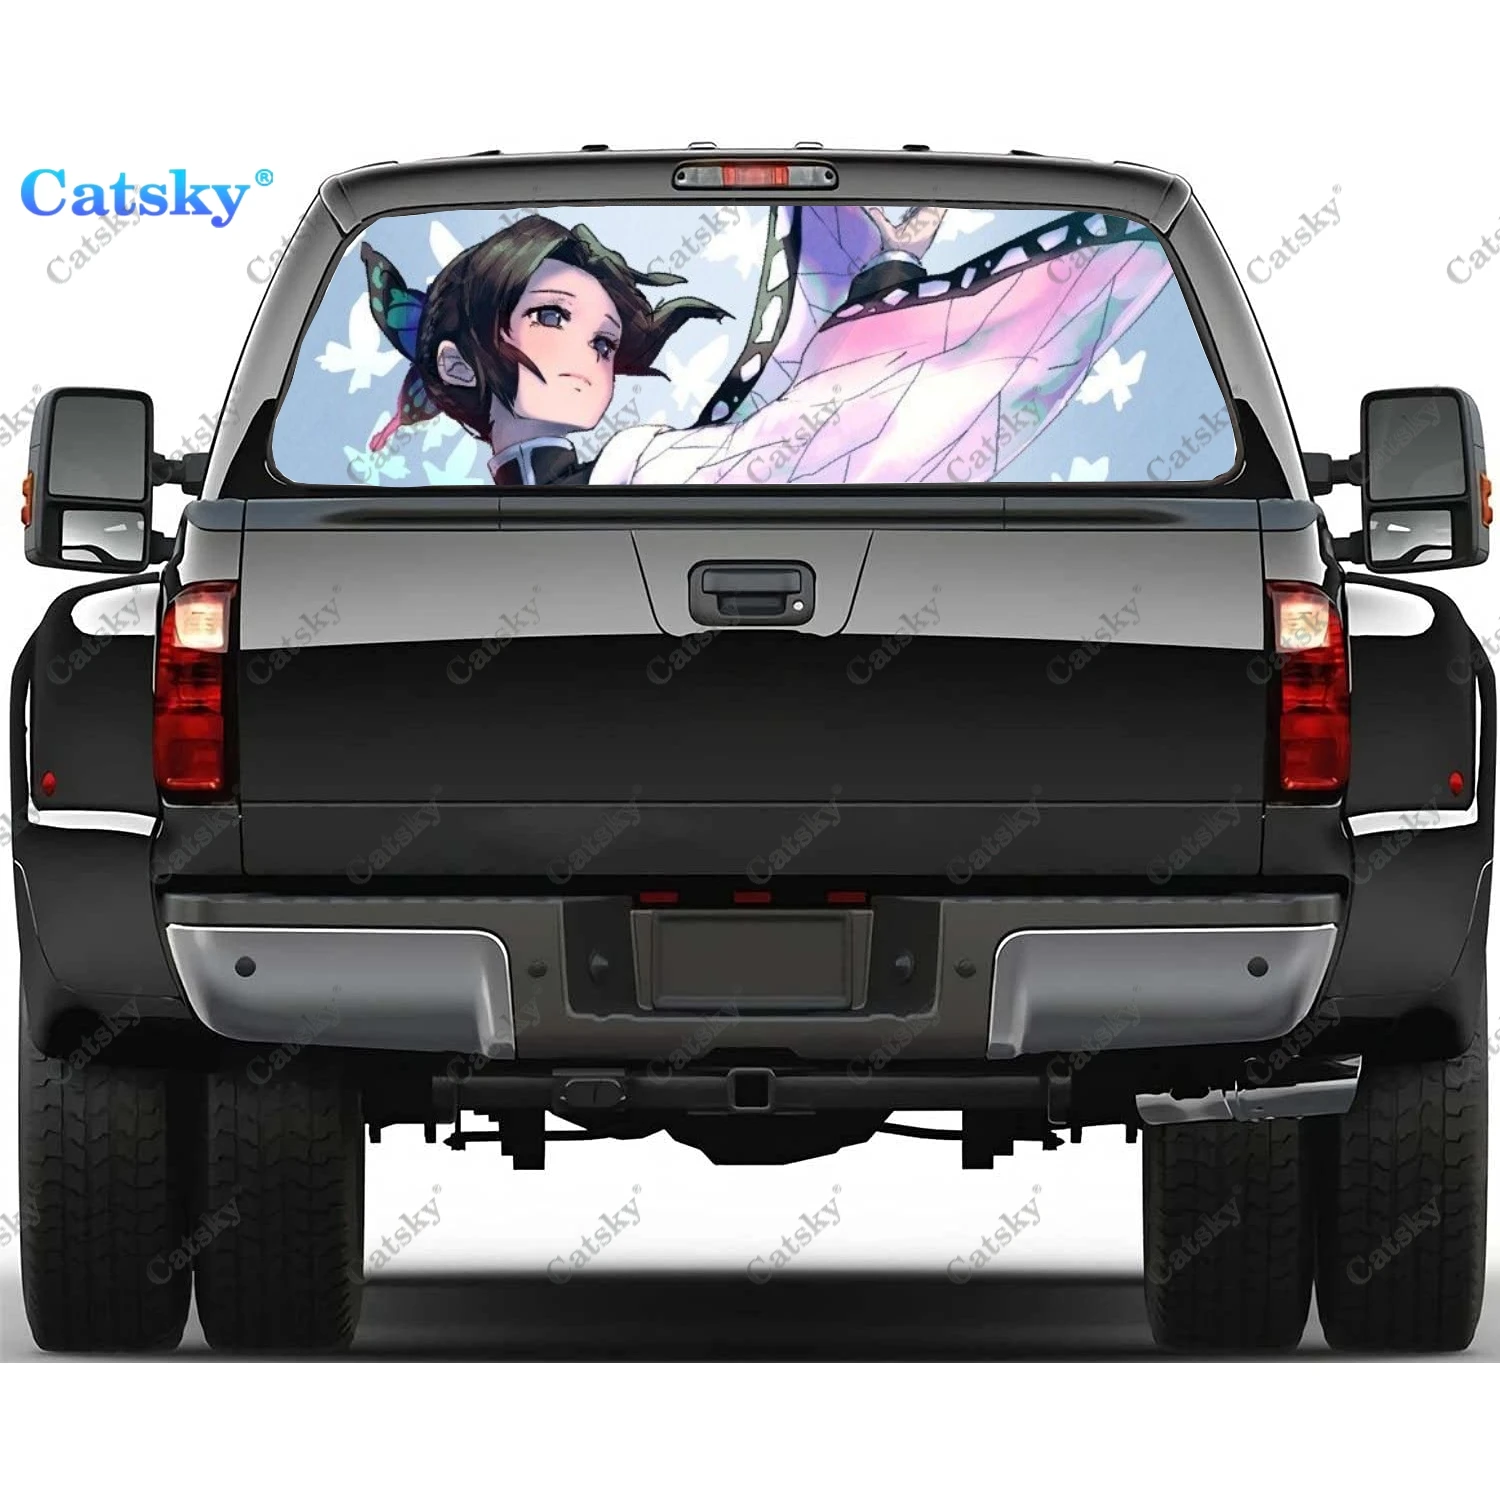 

Anime Demon Slayer Girl Rear Window Stickers Windshield Decal Truck Rear Window Decal Universal Tint Perforated Vinyl Graphic